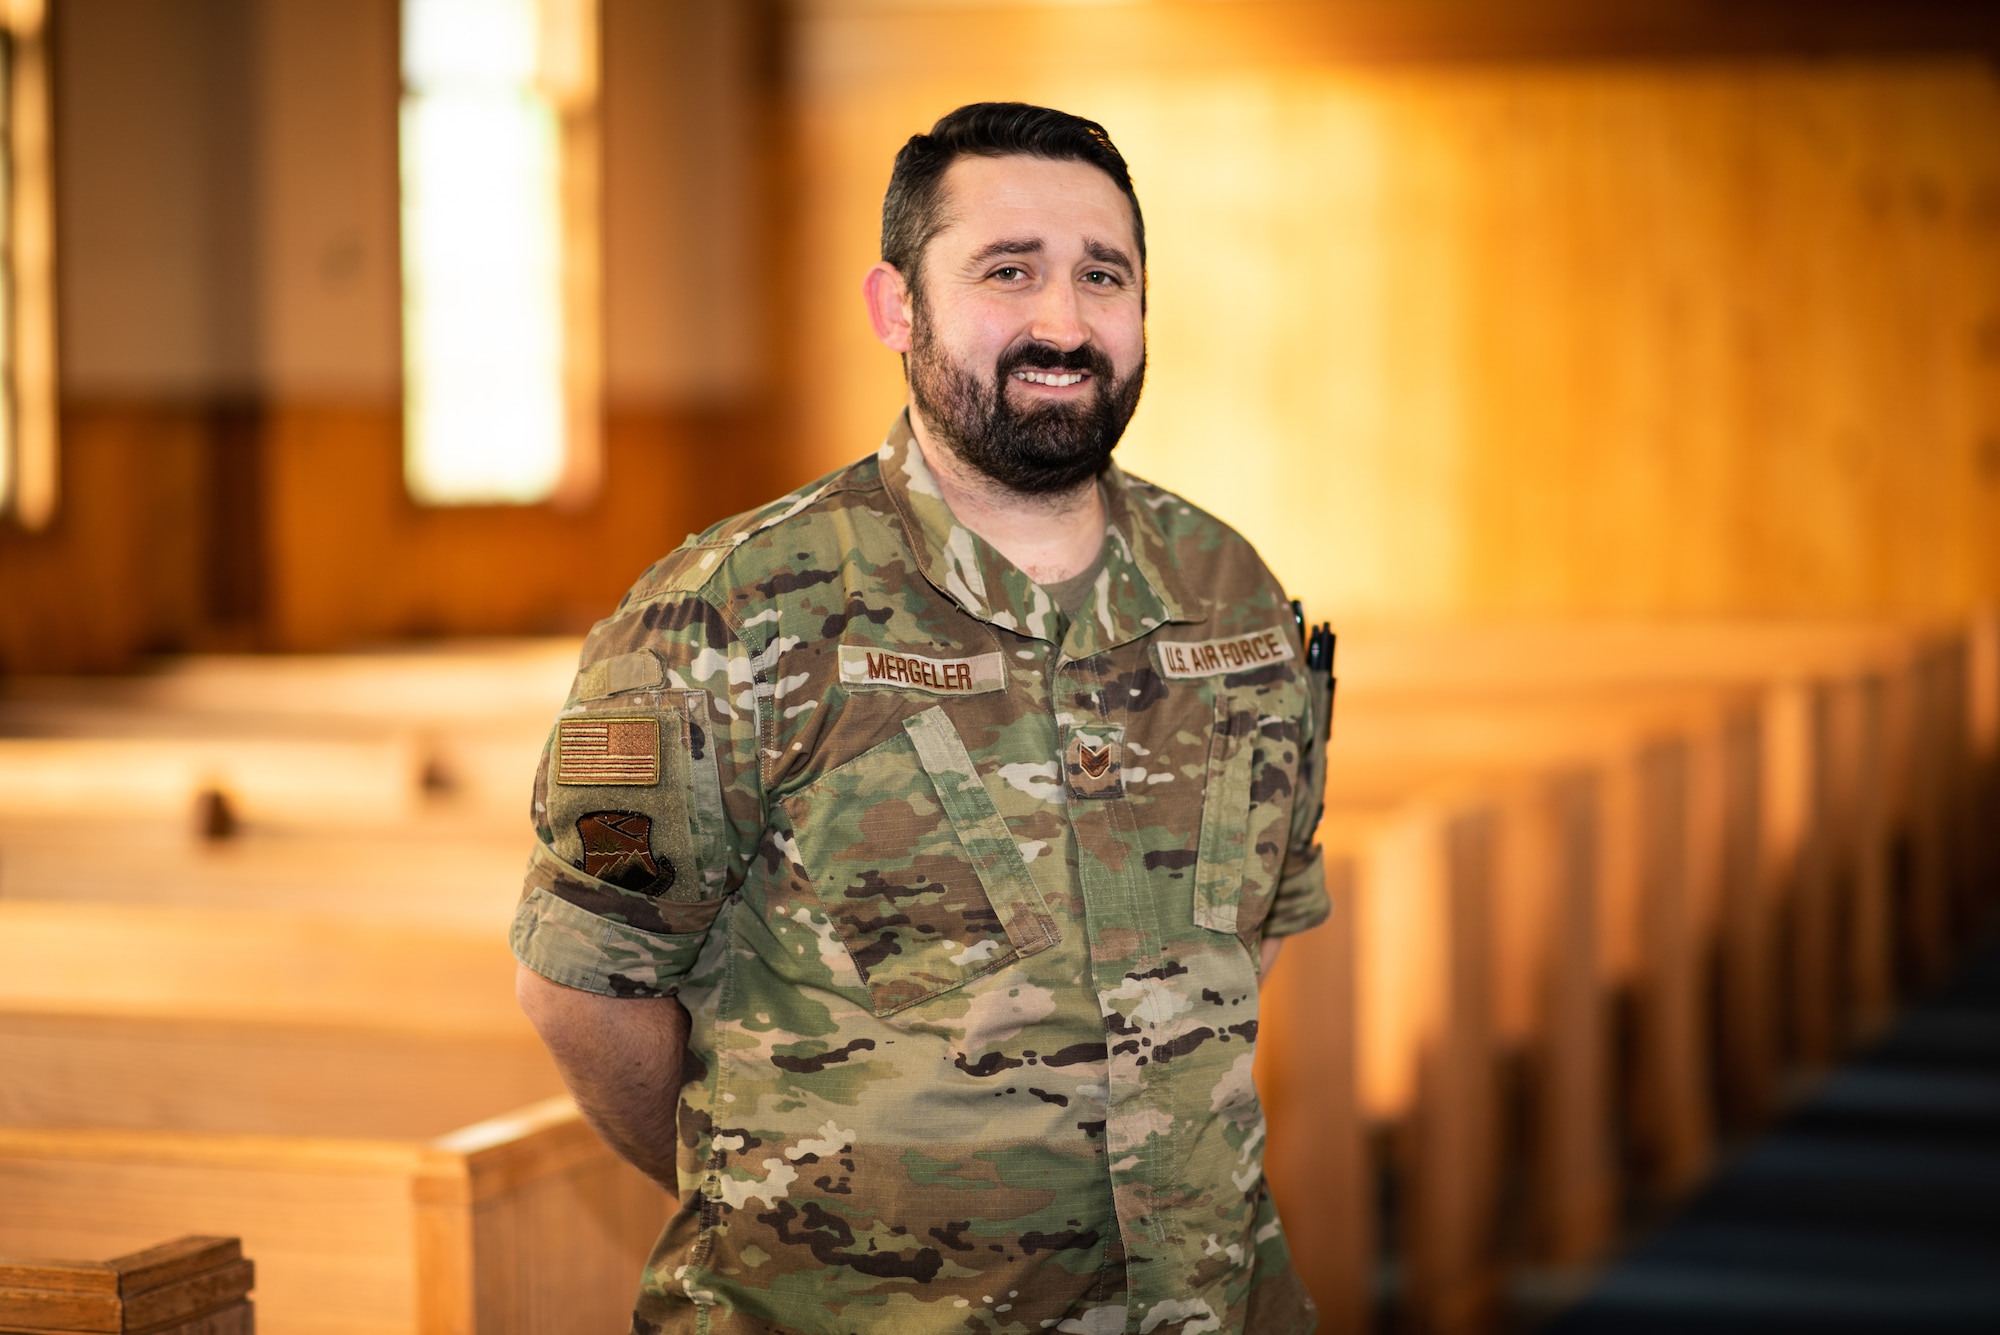 Guardian Angel: Religious Affairs Airman saves Life during Morning Commute